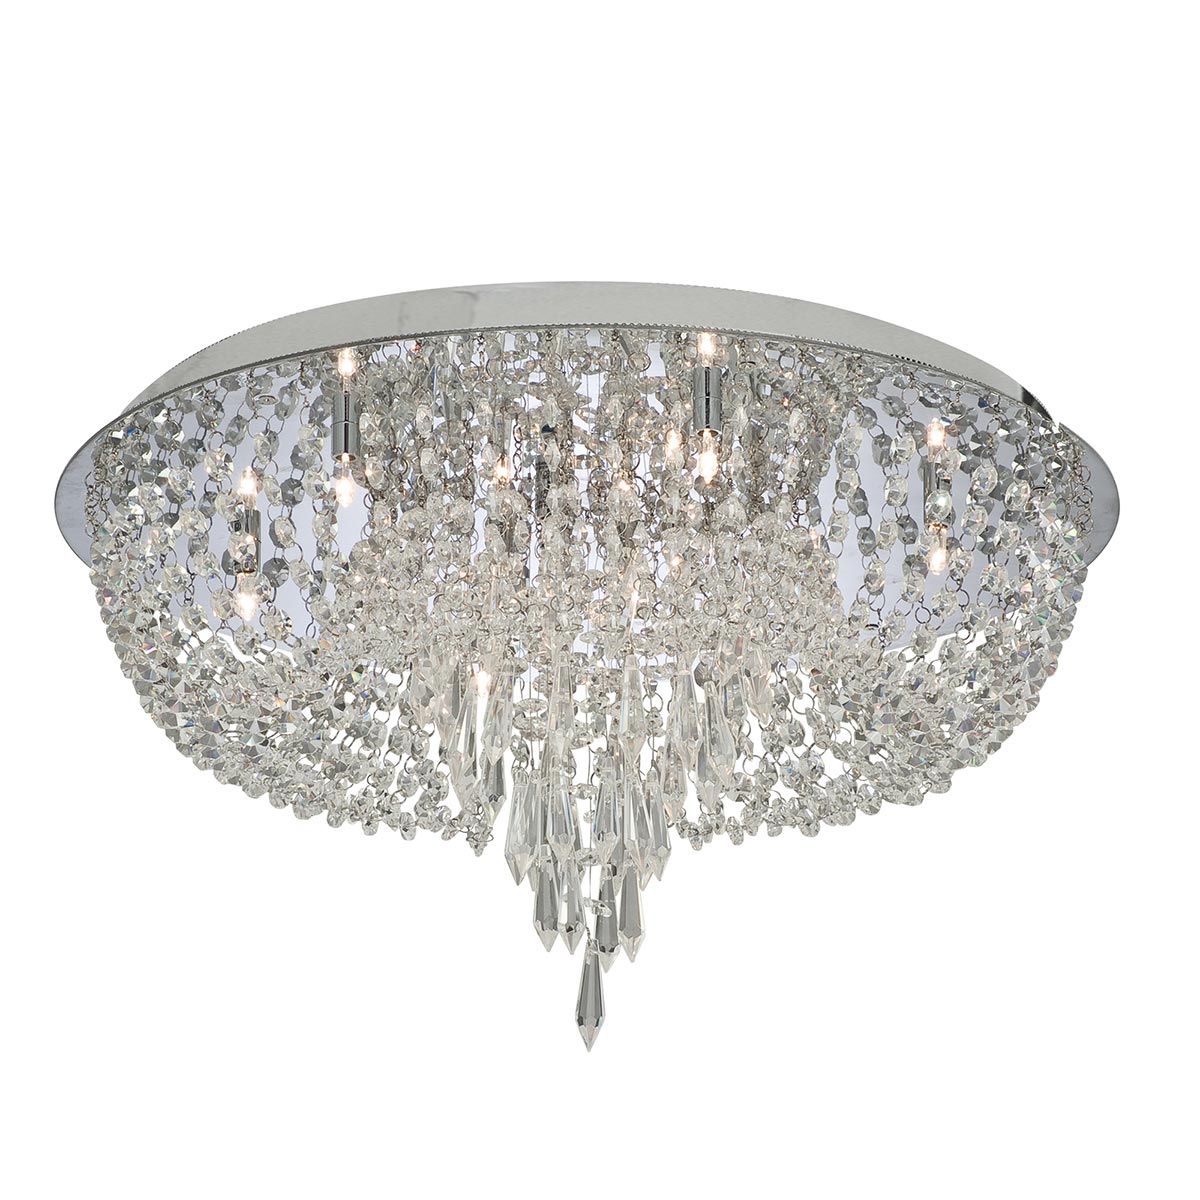 Orion Classic Flush 10 Lamp Crystal Low Ceiling Light Polished Chrome